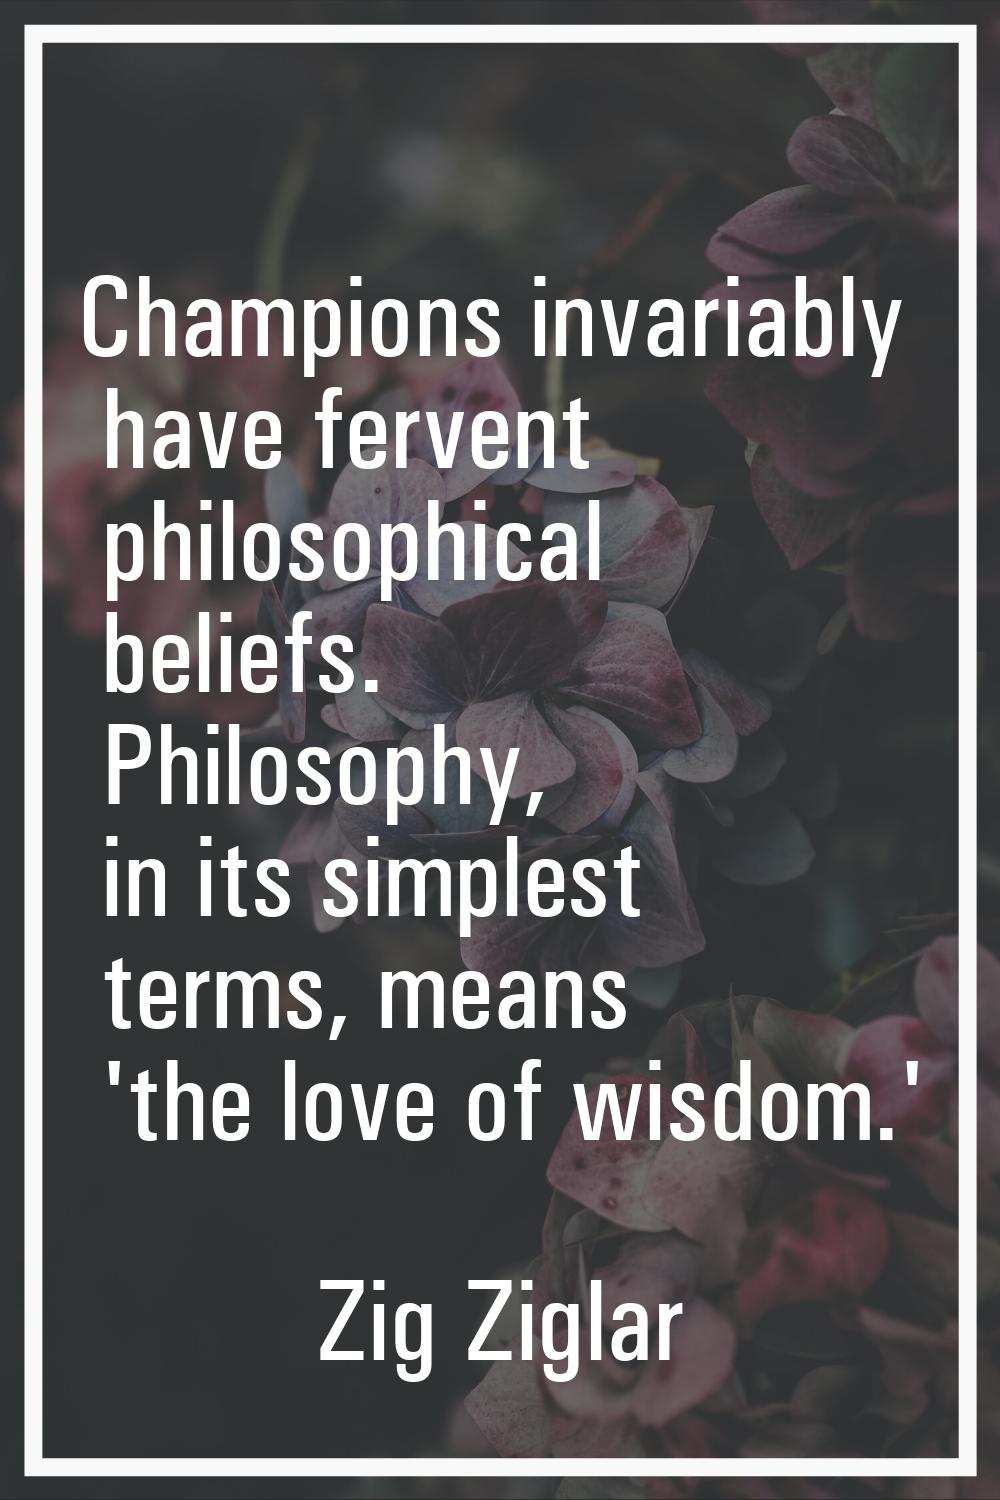 Champions invariably have fervent philosophical beliefs. Philosophy, in its simplest terms, means '